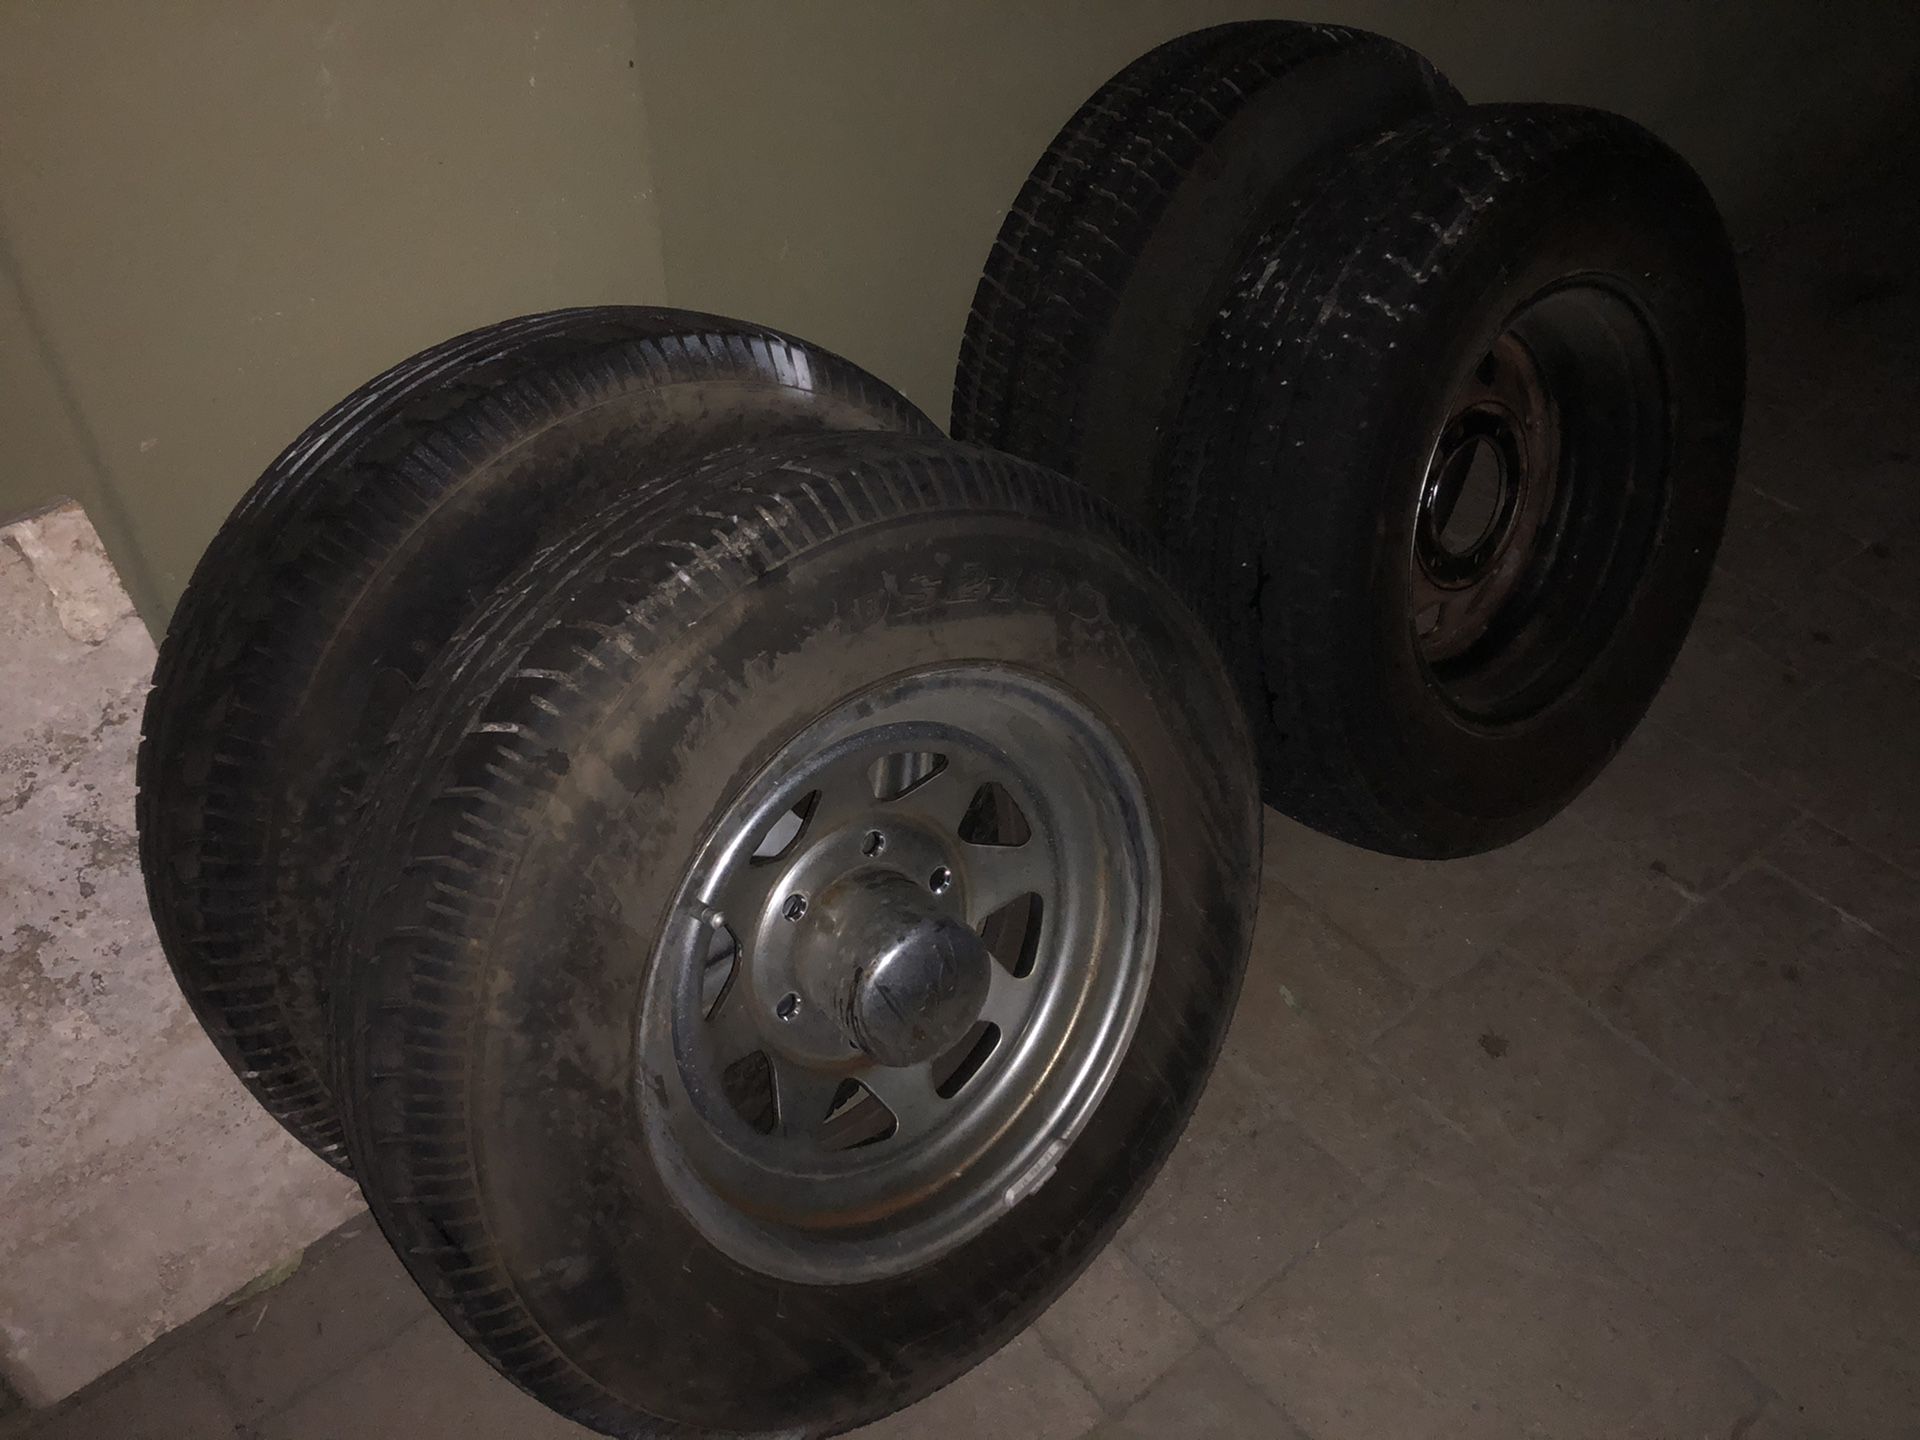 Trailer wheels and tire